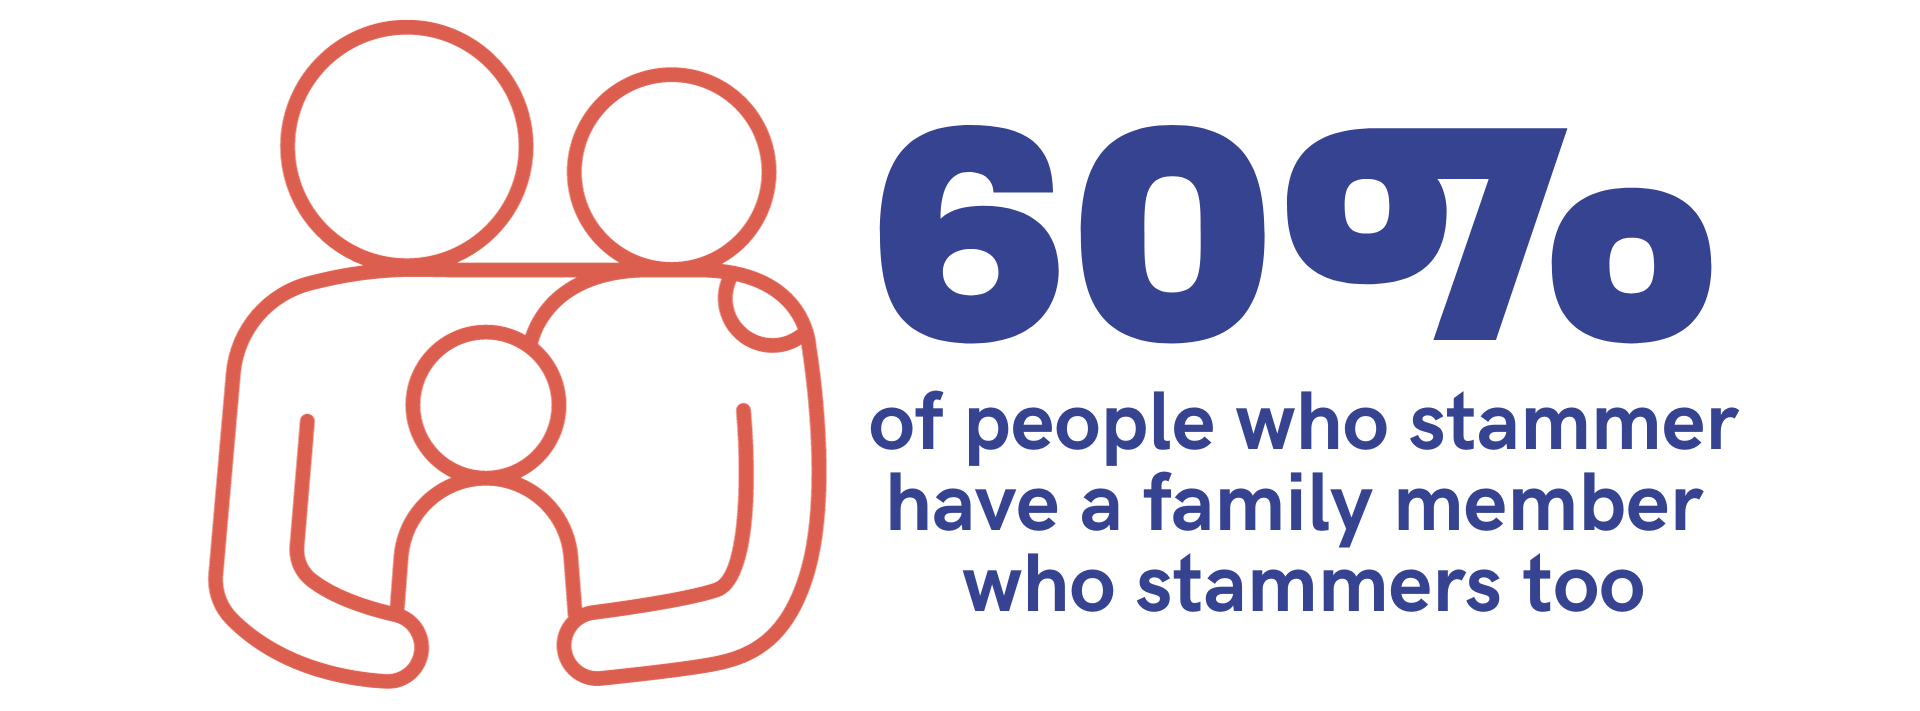 An infographic showing a line drawing of two parents holding an infant child, next to the text '60% of people who stammer have family member who stammers too'.